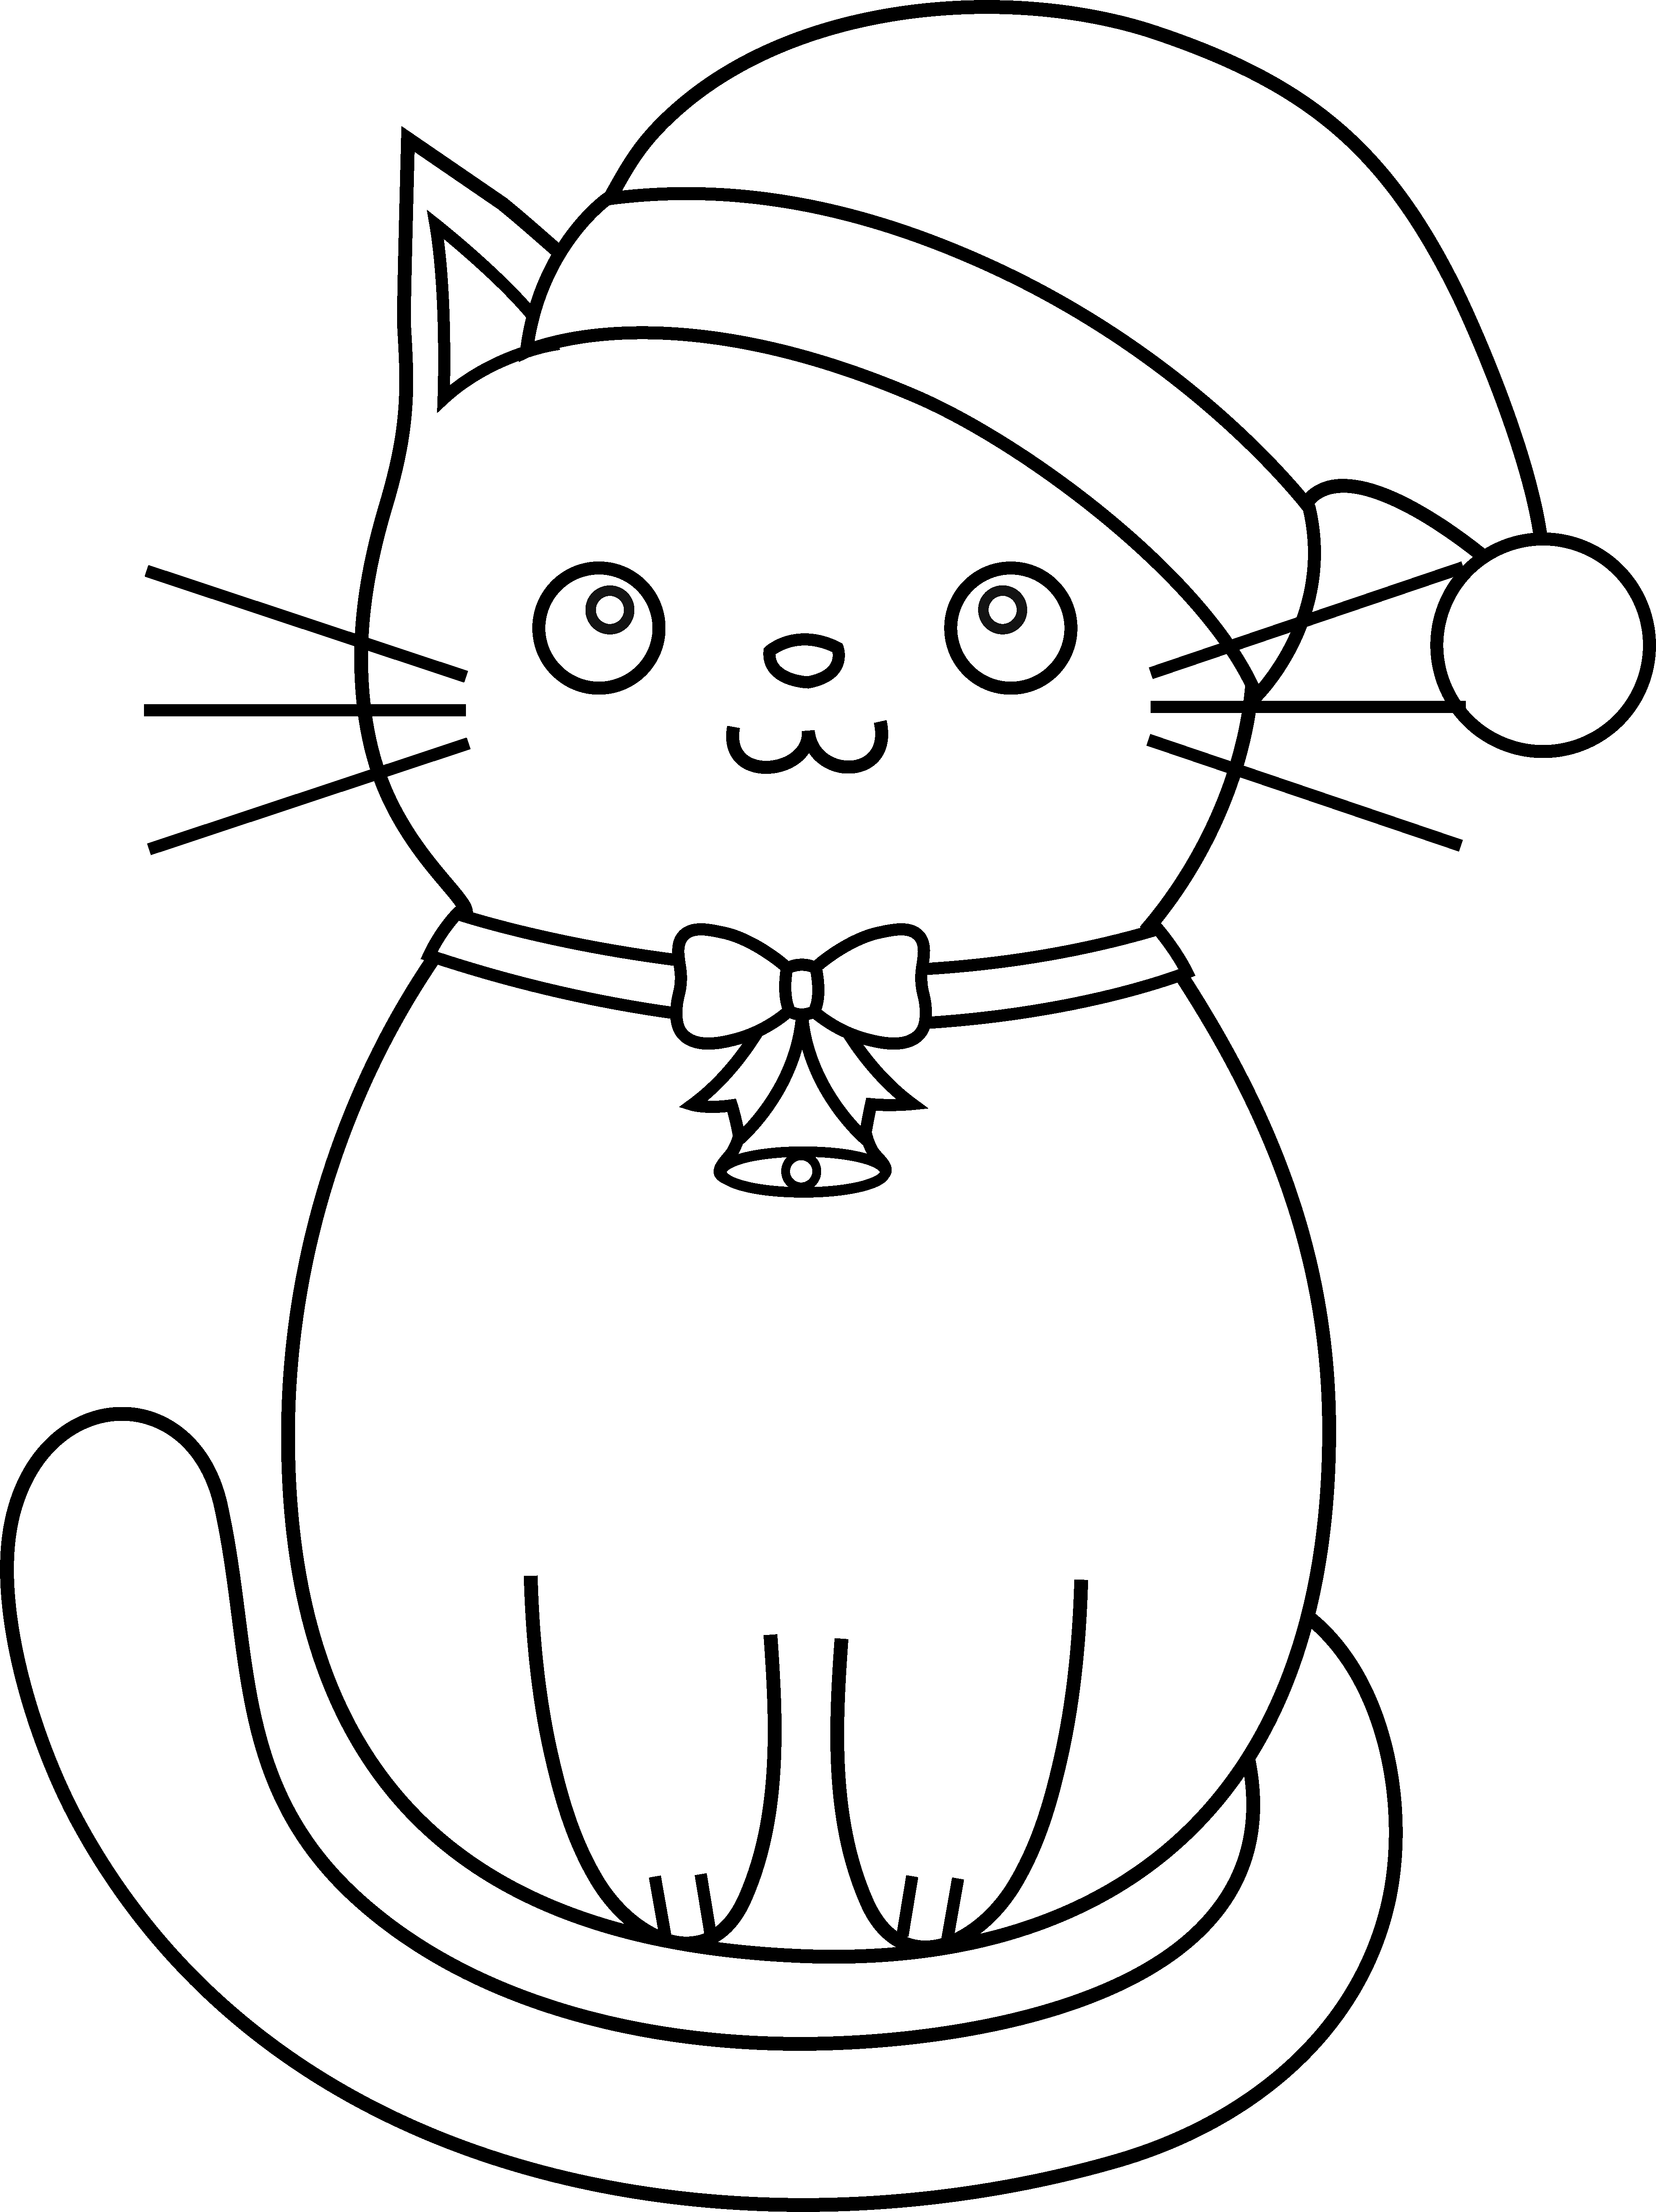 Kitten Coloring Pages Best Coloring Pages For Kids